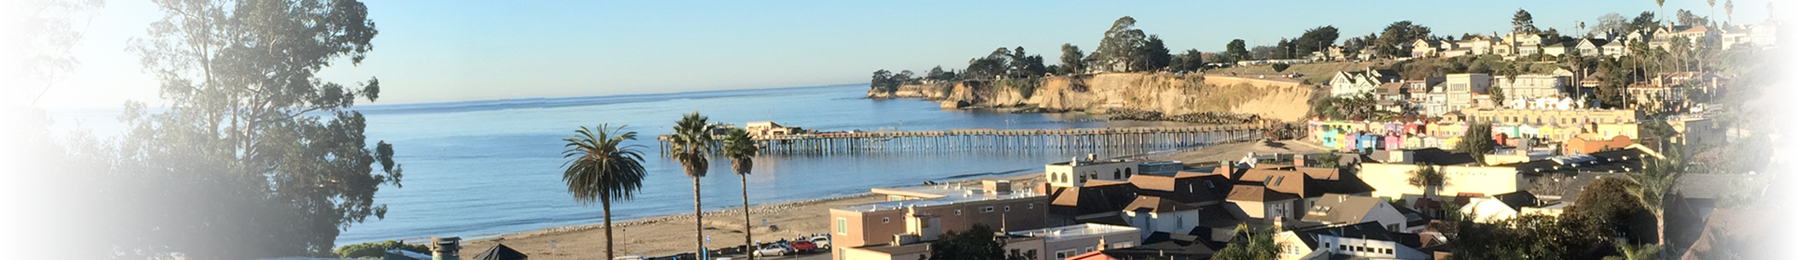 Land Use Attorney Capitola